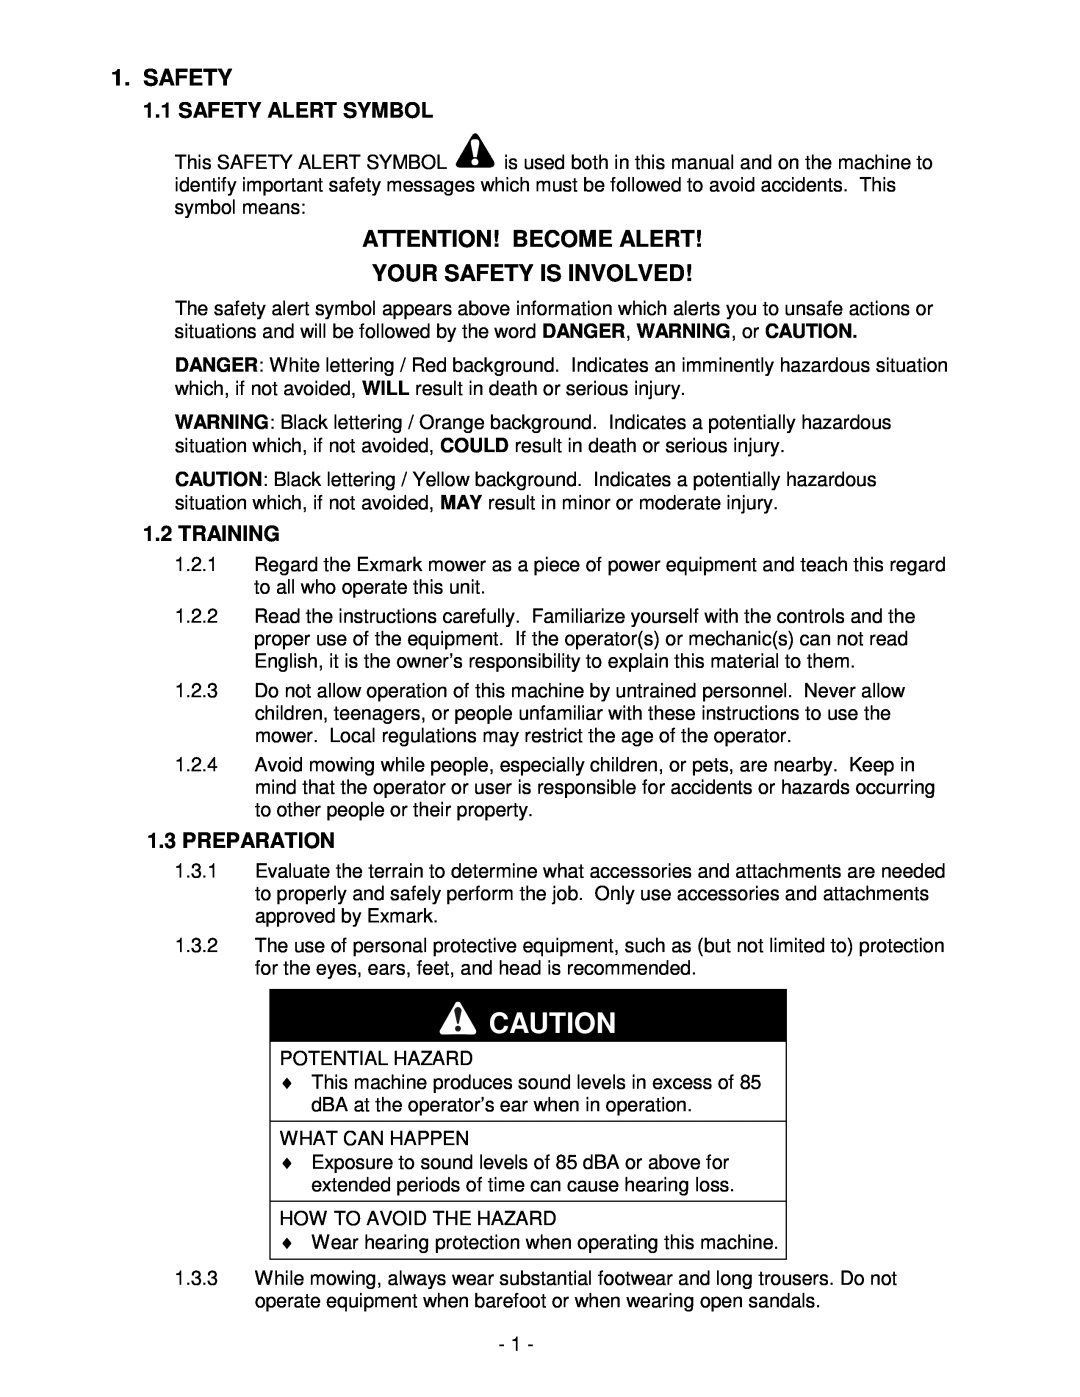 Exmark Lawn Tractor manual Attention! Become Alert Your Safety Is Involved, Safety Alert Symbol, Training, Preparation 